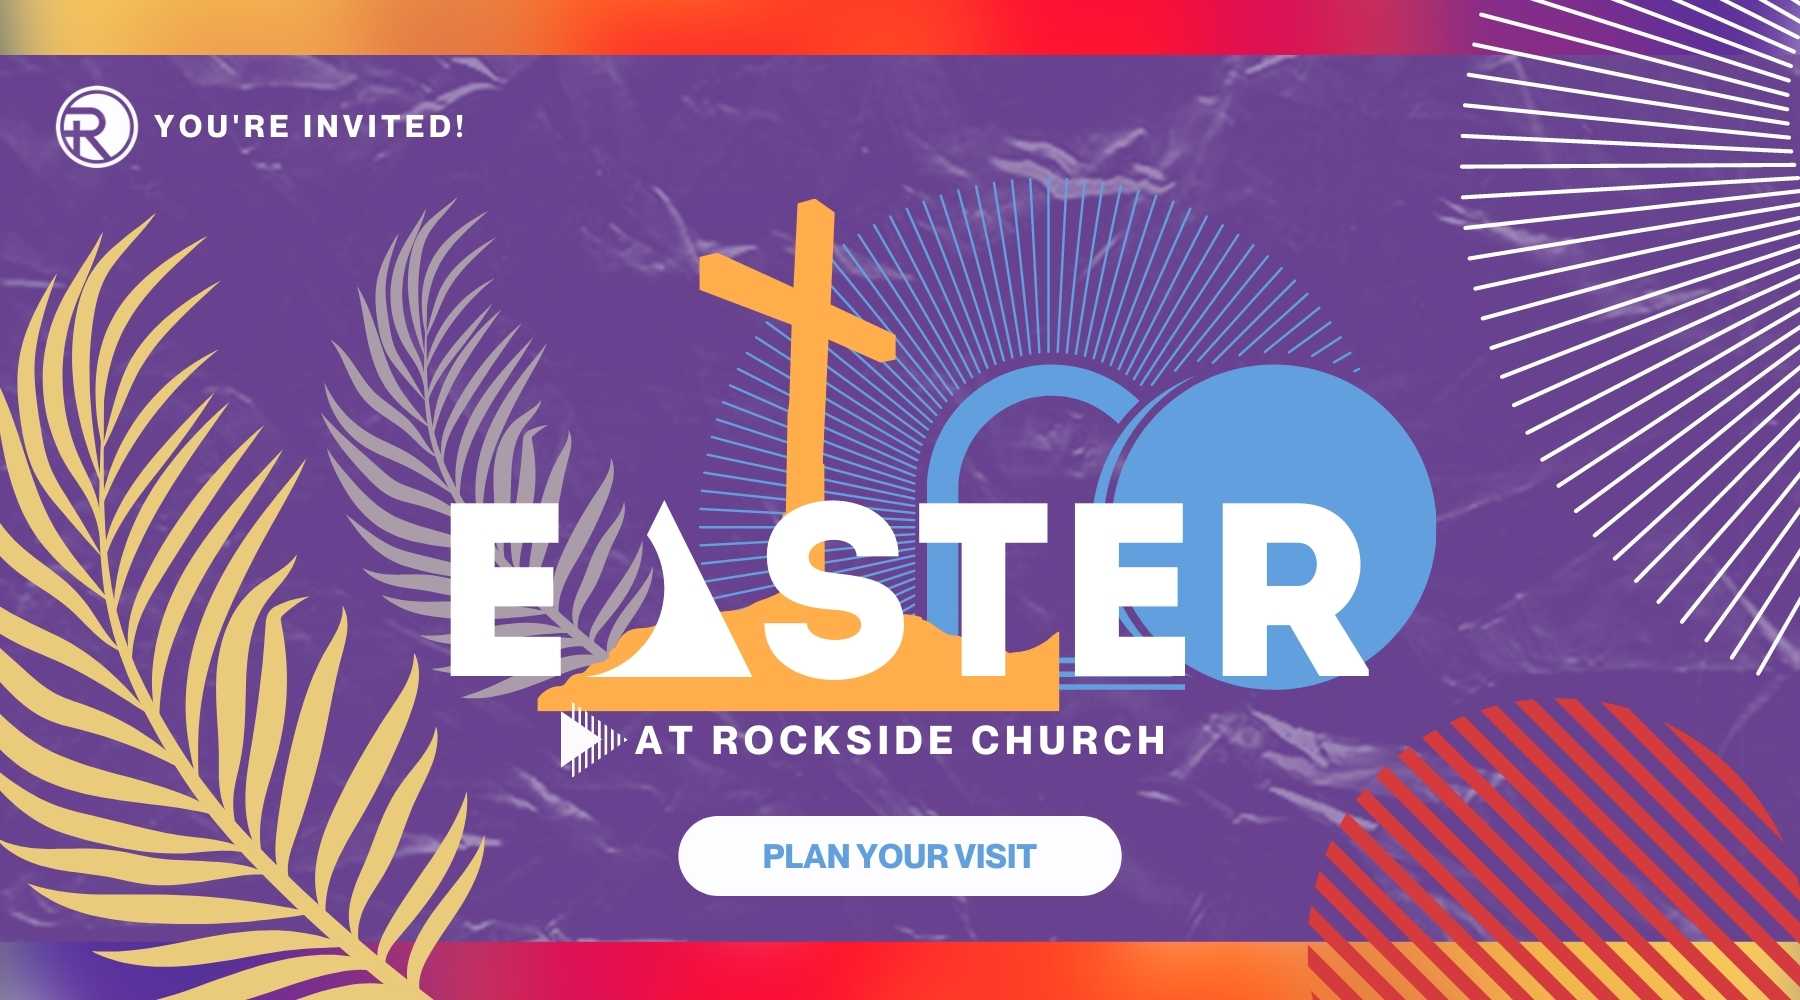 EASTER AT ROCKSIDE CHURCH